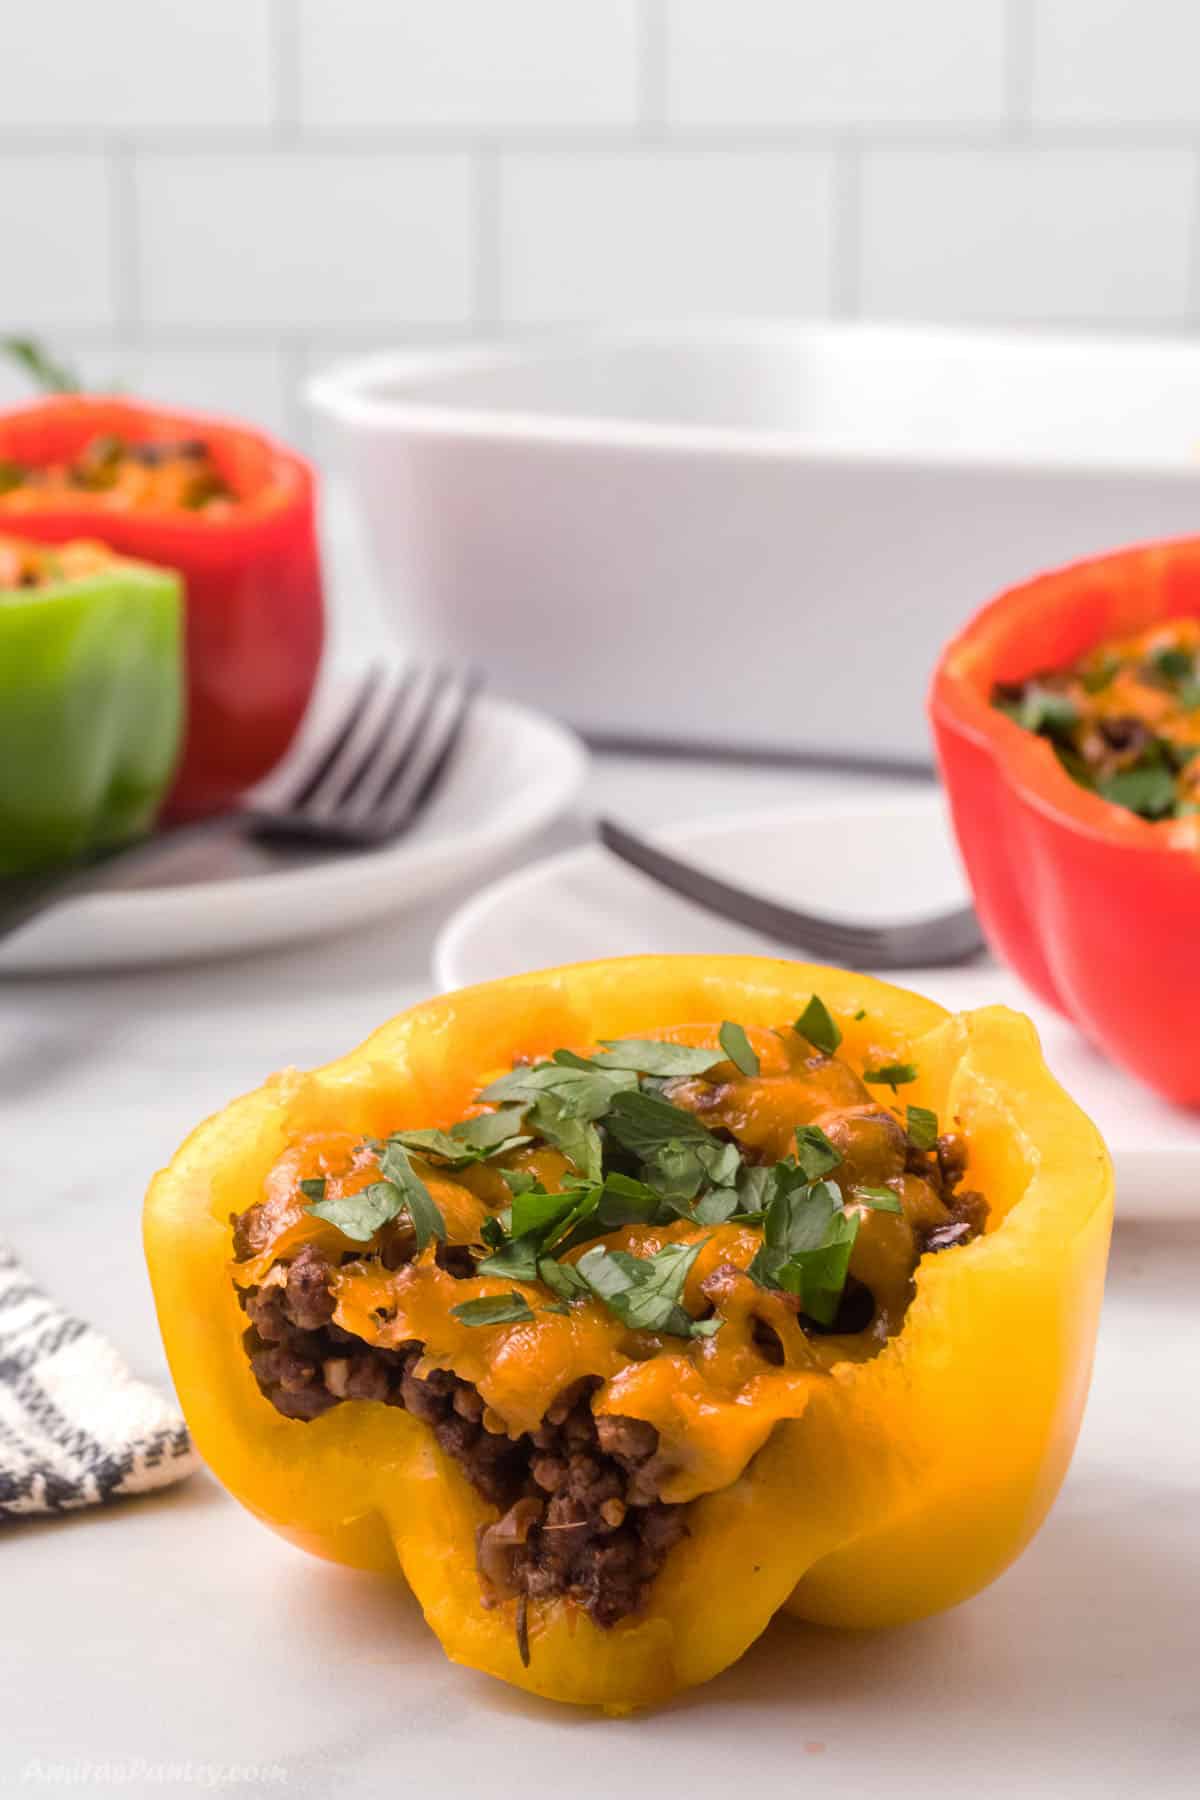 A close up look at a cut yellow pepper to show stuffing.